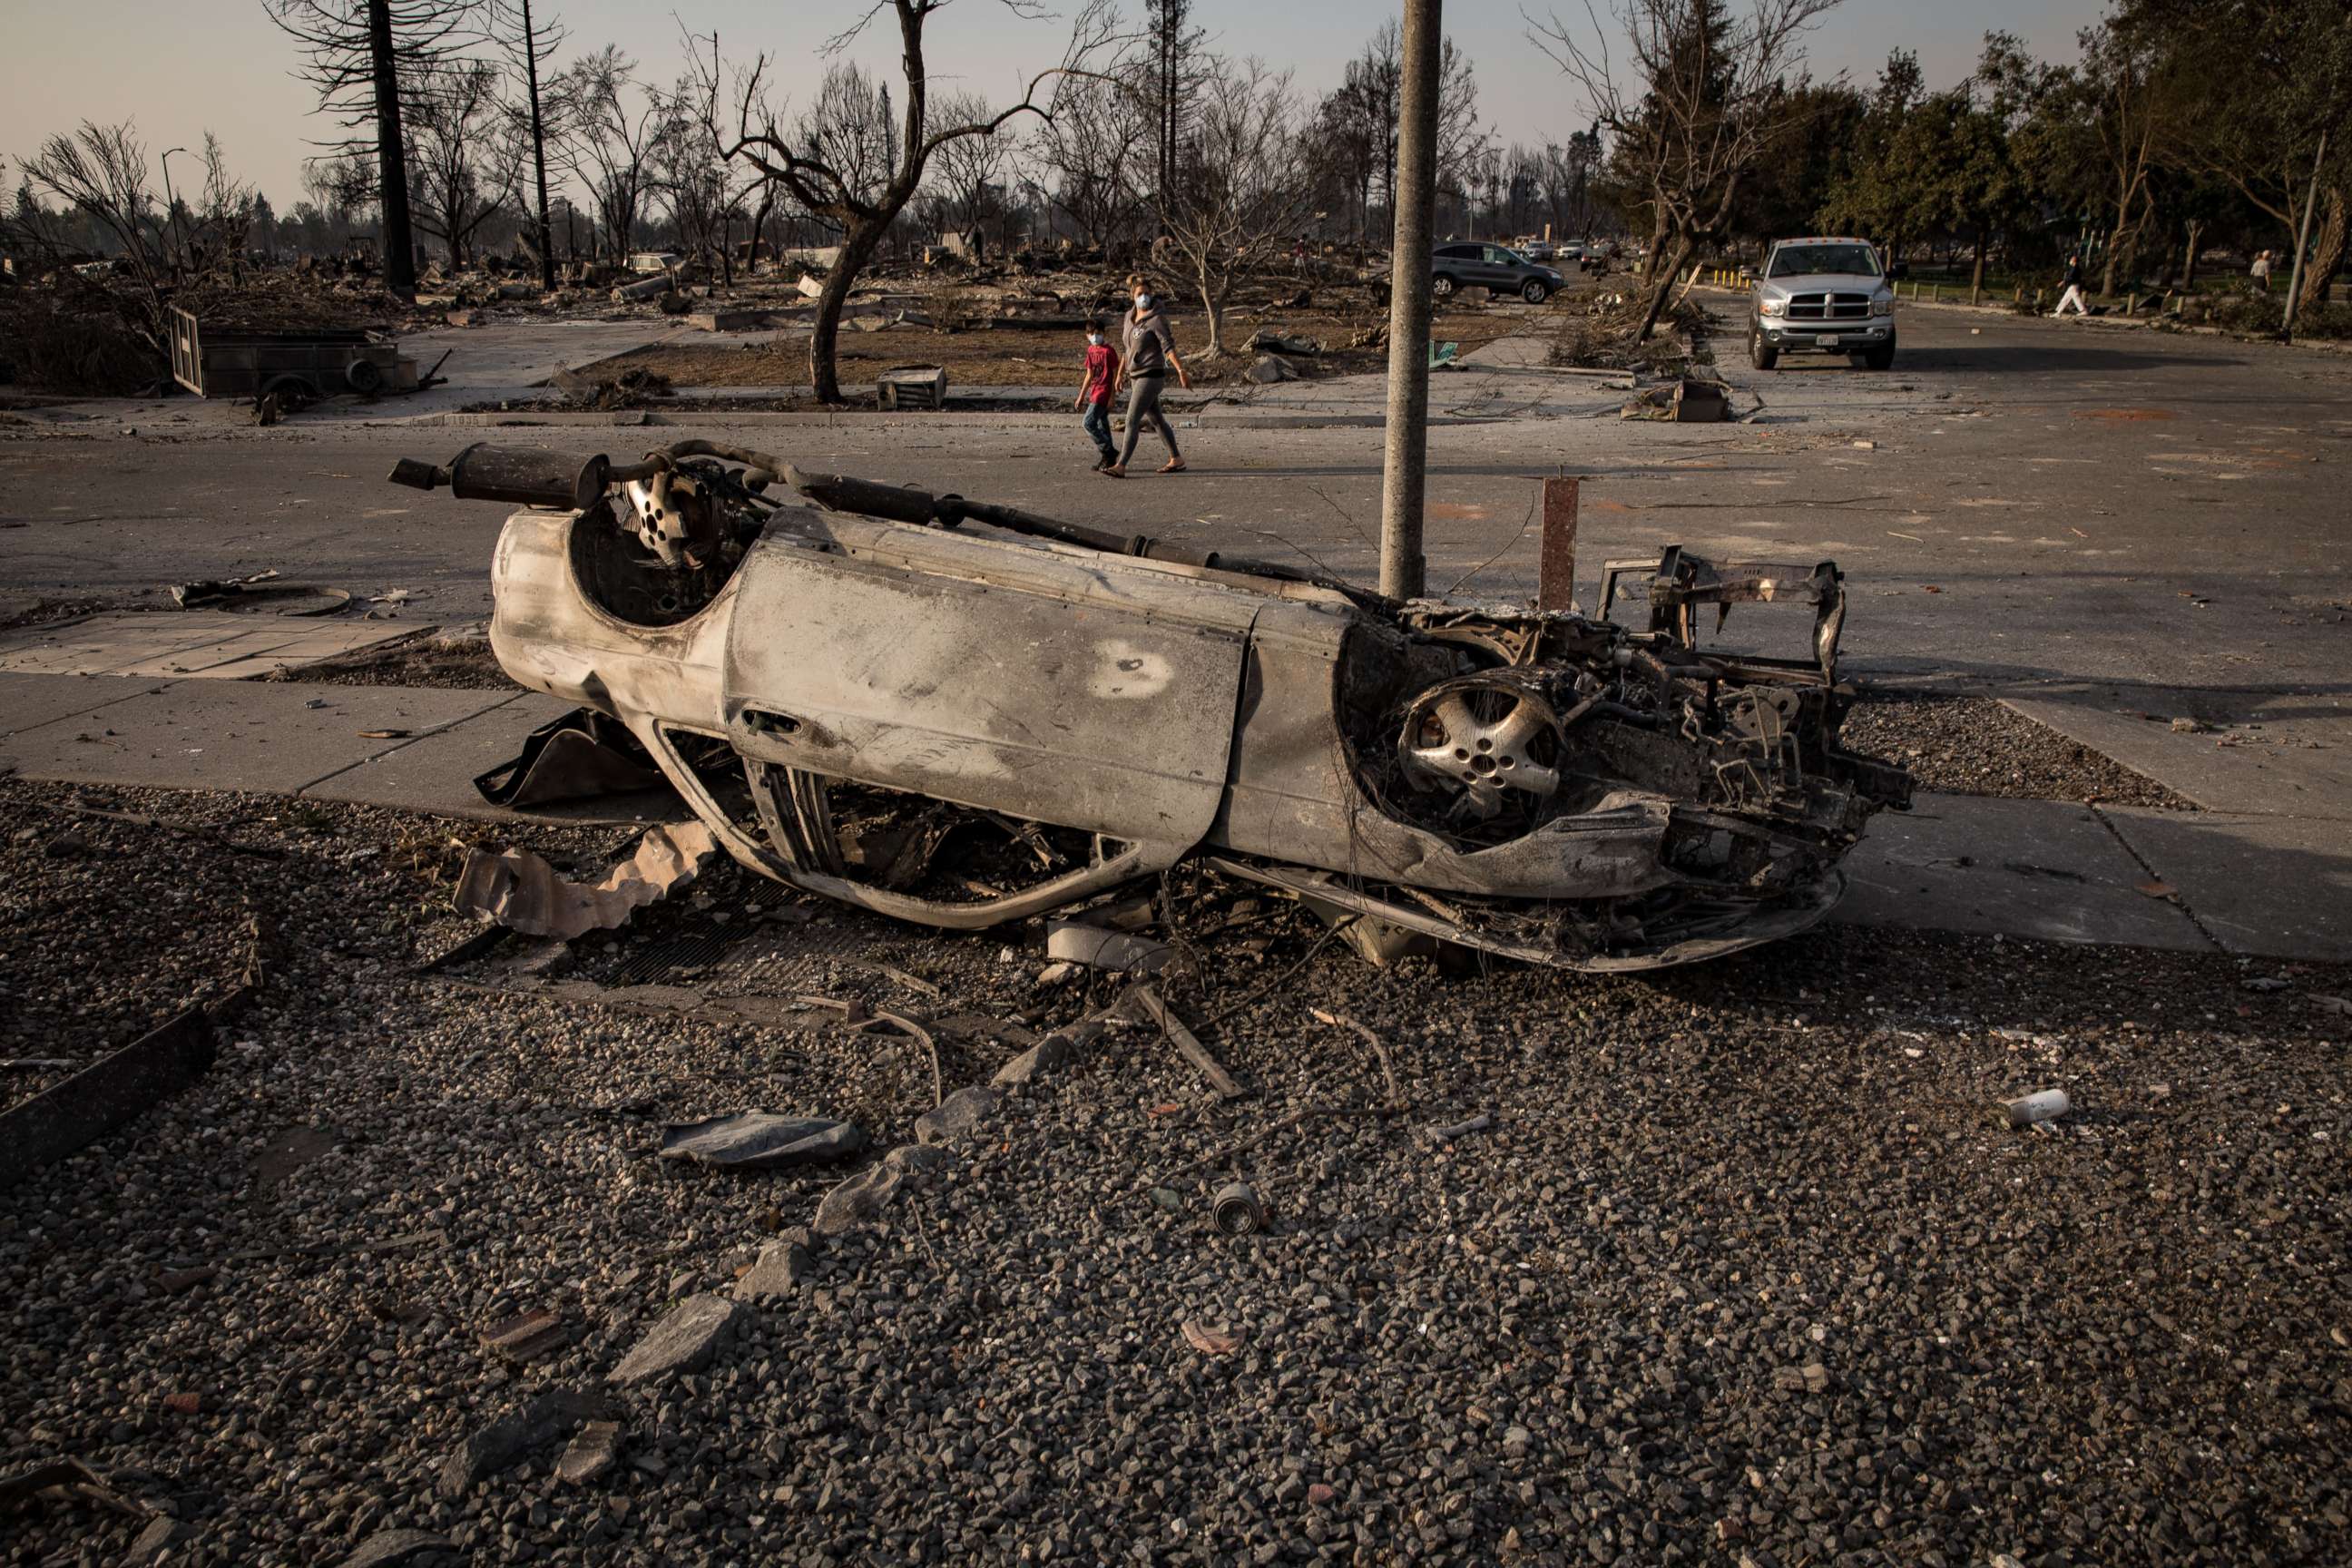 PHOTO: A burned-out car, likely knocked upside down by a gasoline explosion, sits in the ruins of the Coffey Park neighborhood of Santa Rosa, Calif., Oct. 11, 2017.